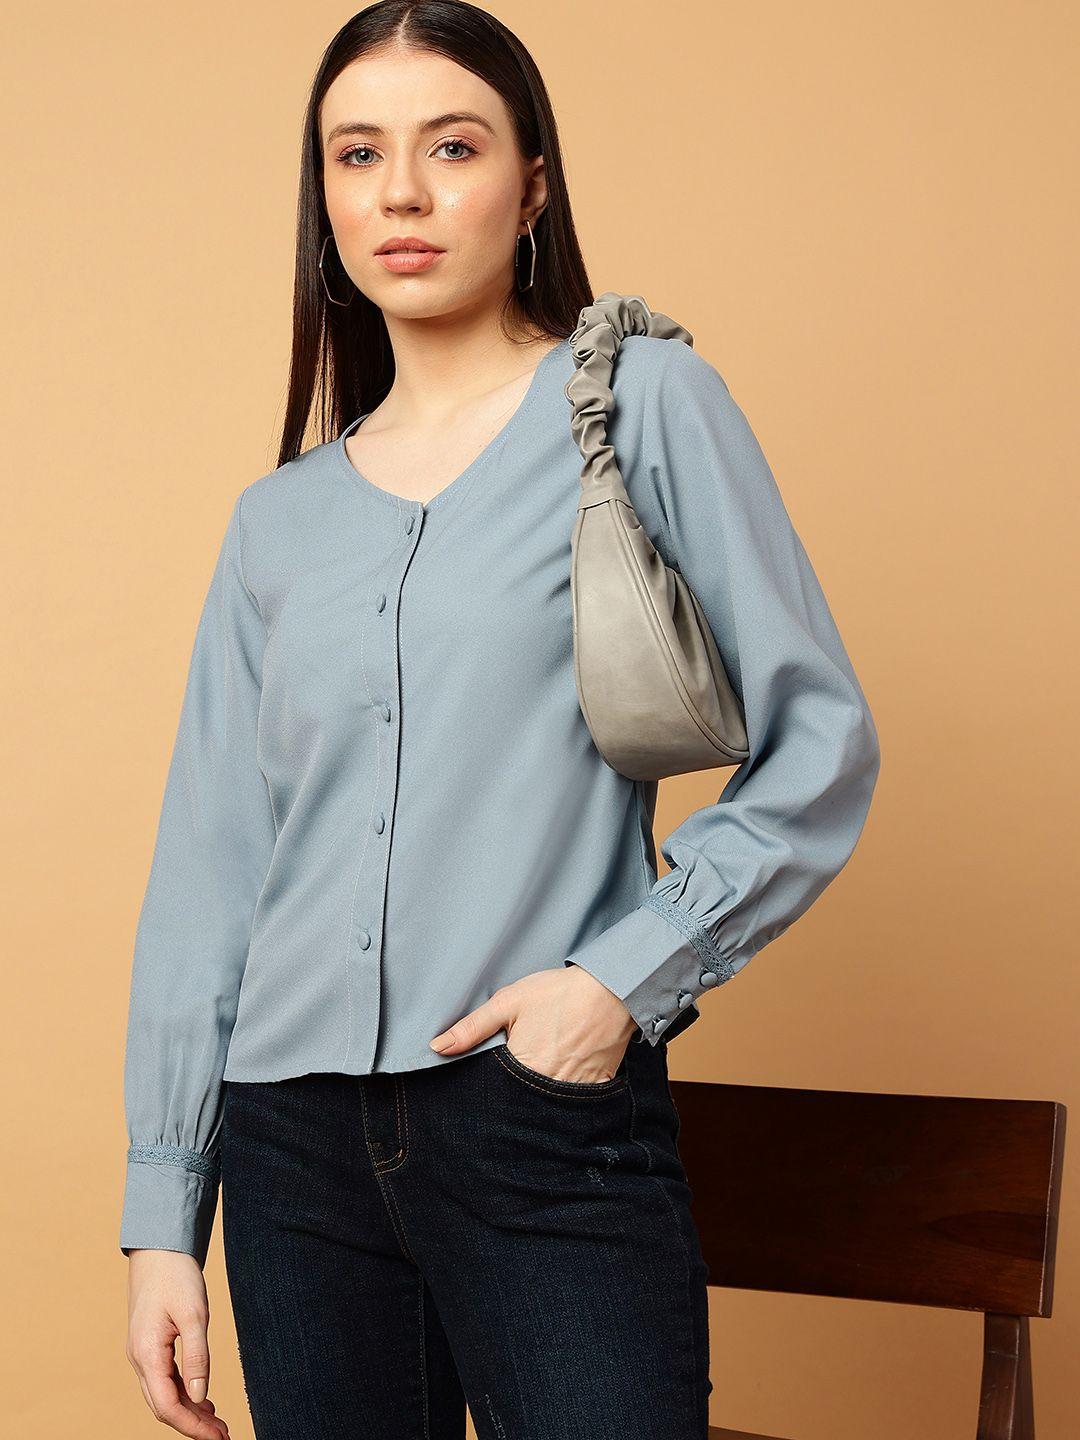 mint street v-neck cuffed sleeves shirt style top